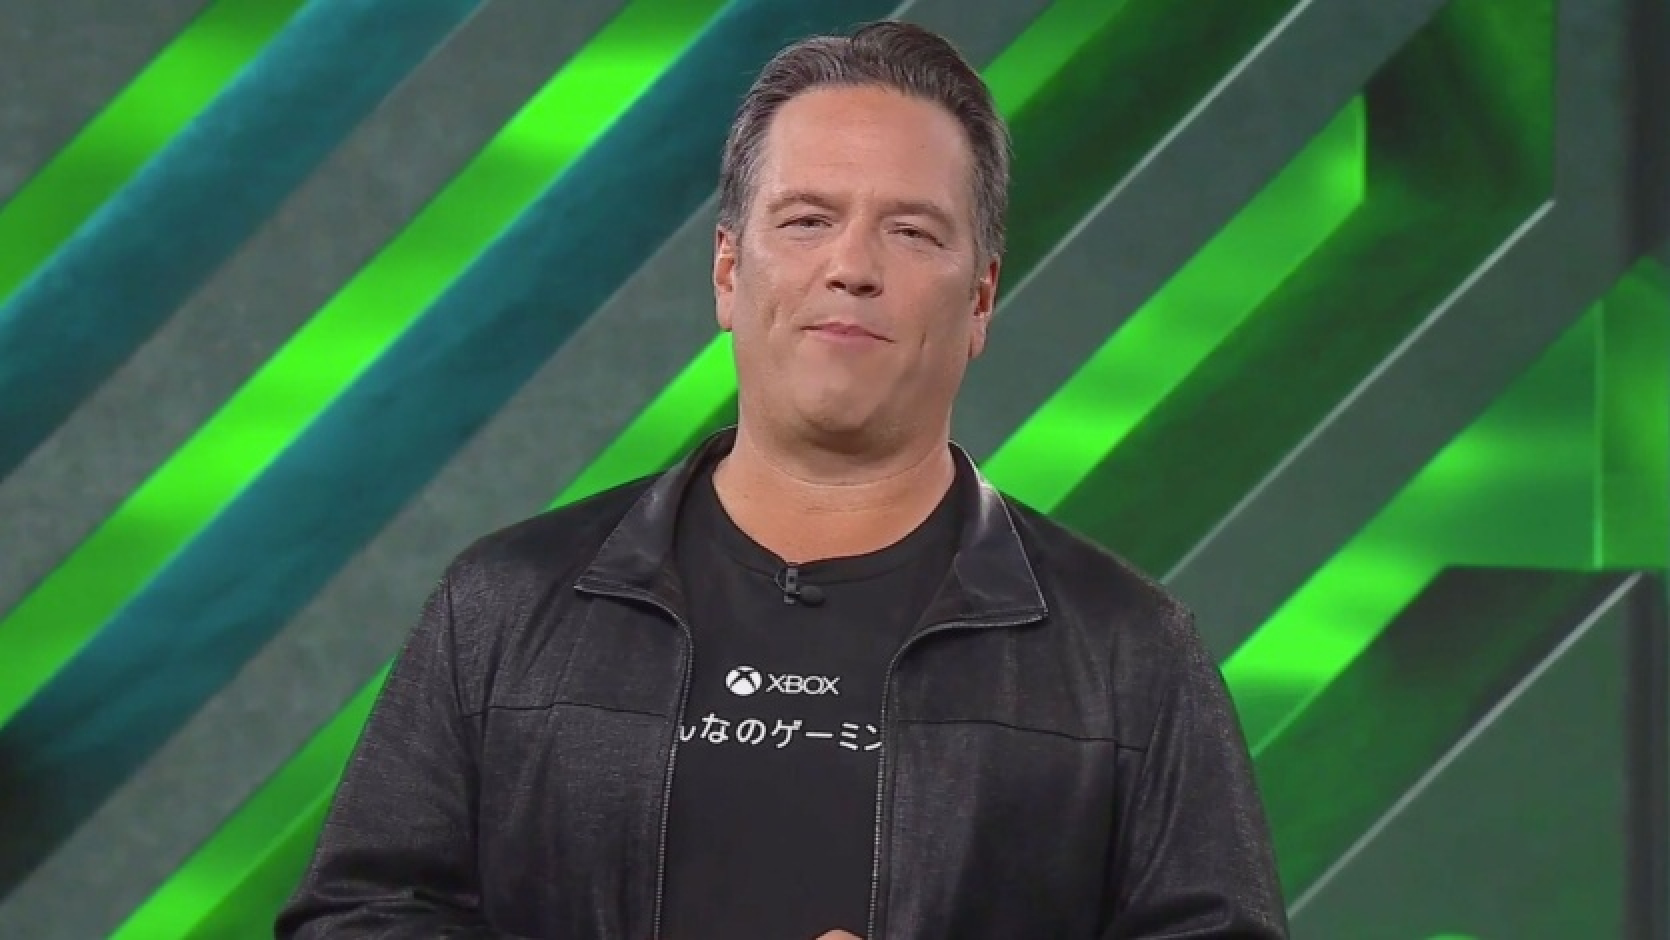 Console market in stagnation, other outlets may be coming to Xbox - Phil Spencer